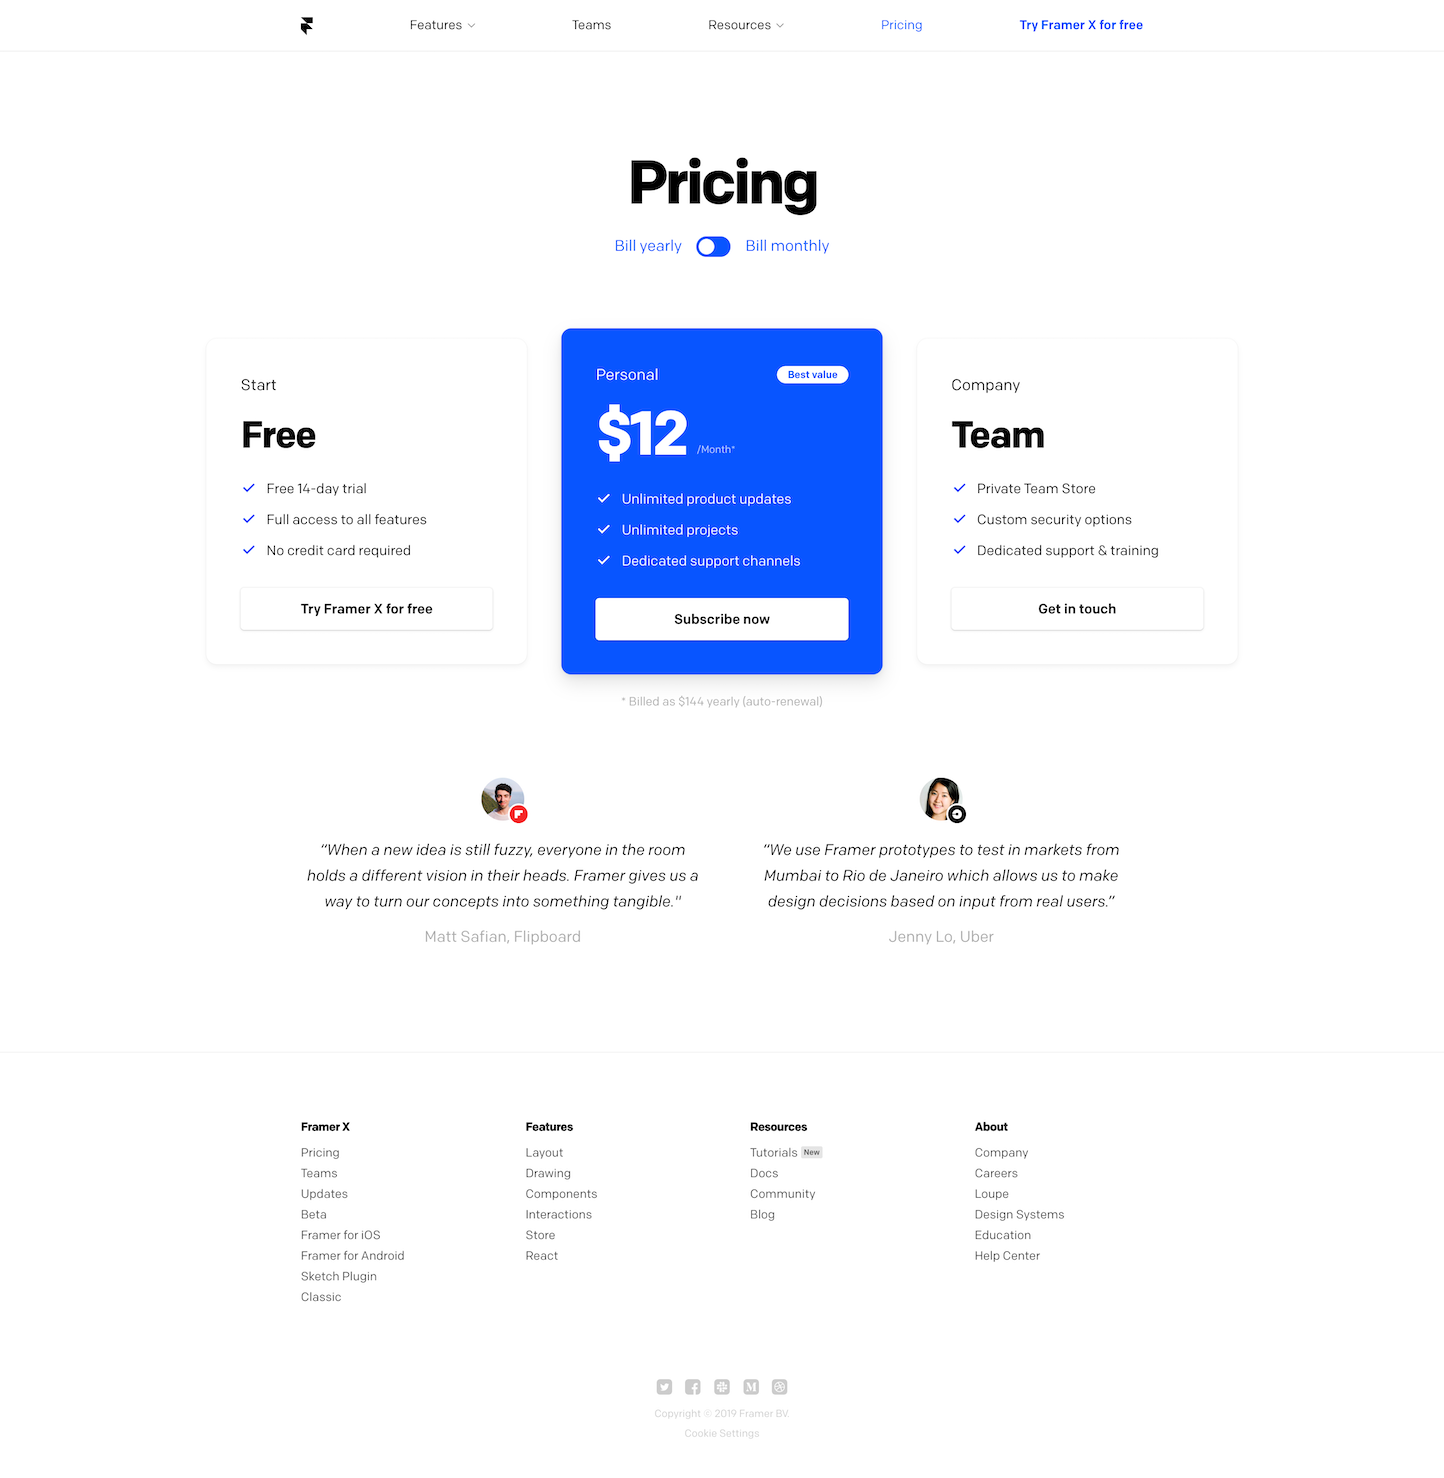 Screenshot of the Pricing page from the Framer website.